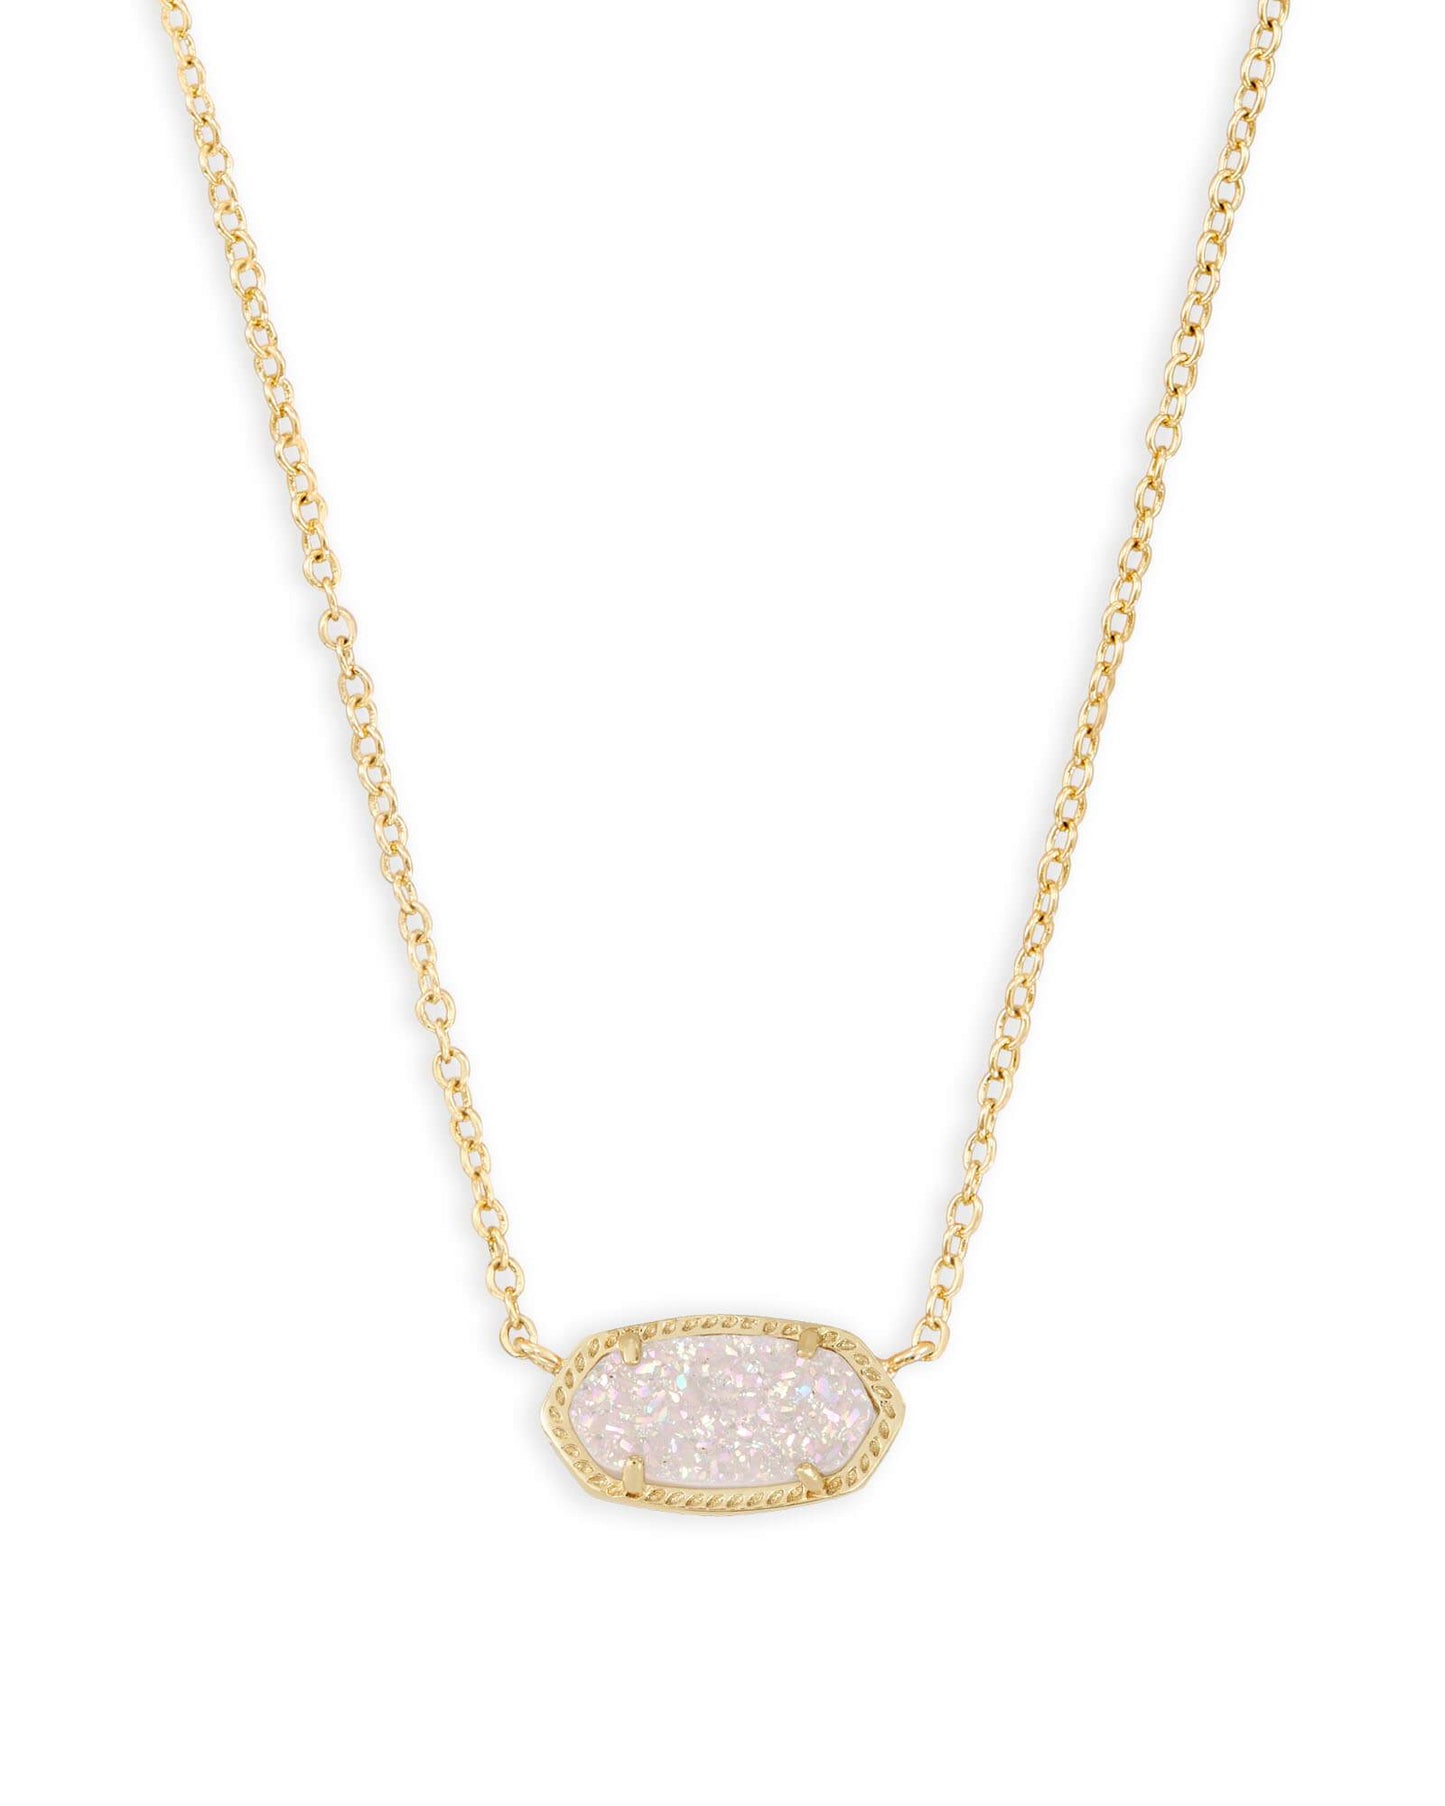 Load image into Gallery viewer, Kendra Scott, ELISA NECKLACE, 4217709208, N5067GLD, 0.63&amp;#39;L x 0.38&amp;#39;W stationary pendant, 15&amp;#39; chain with 2&amp;#39; extender, GOLD IRIDESCENT DRUSY
